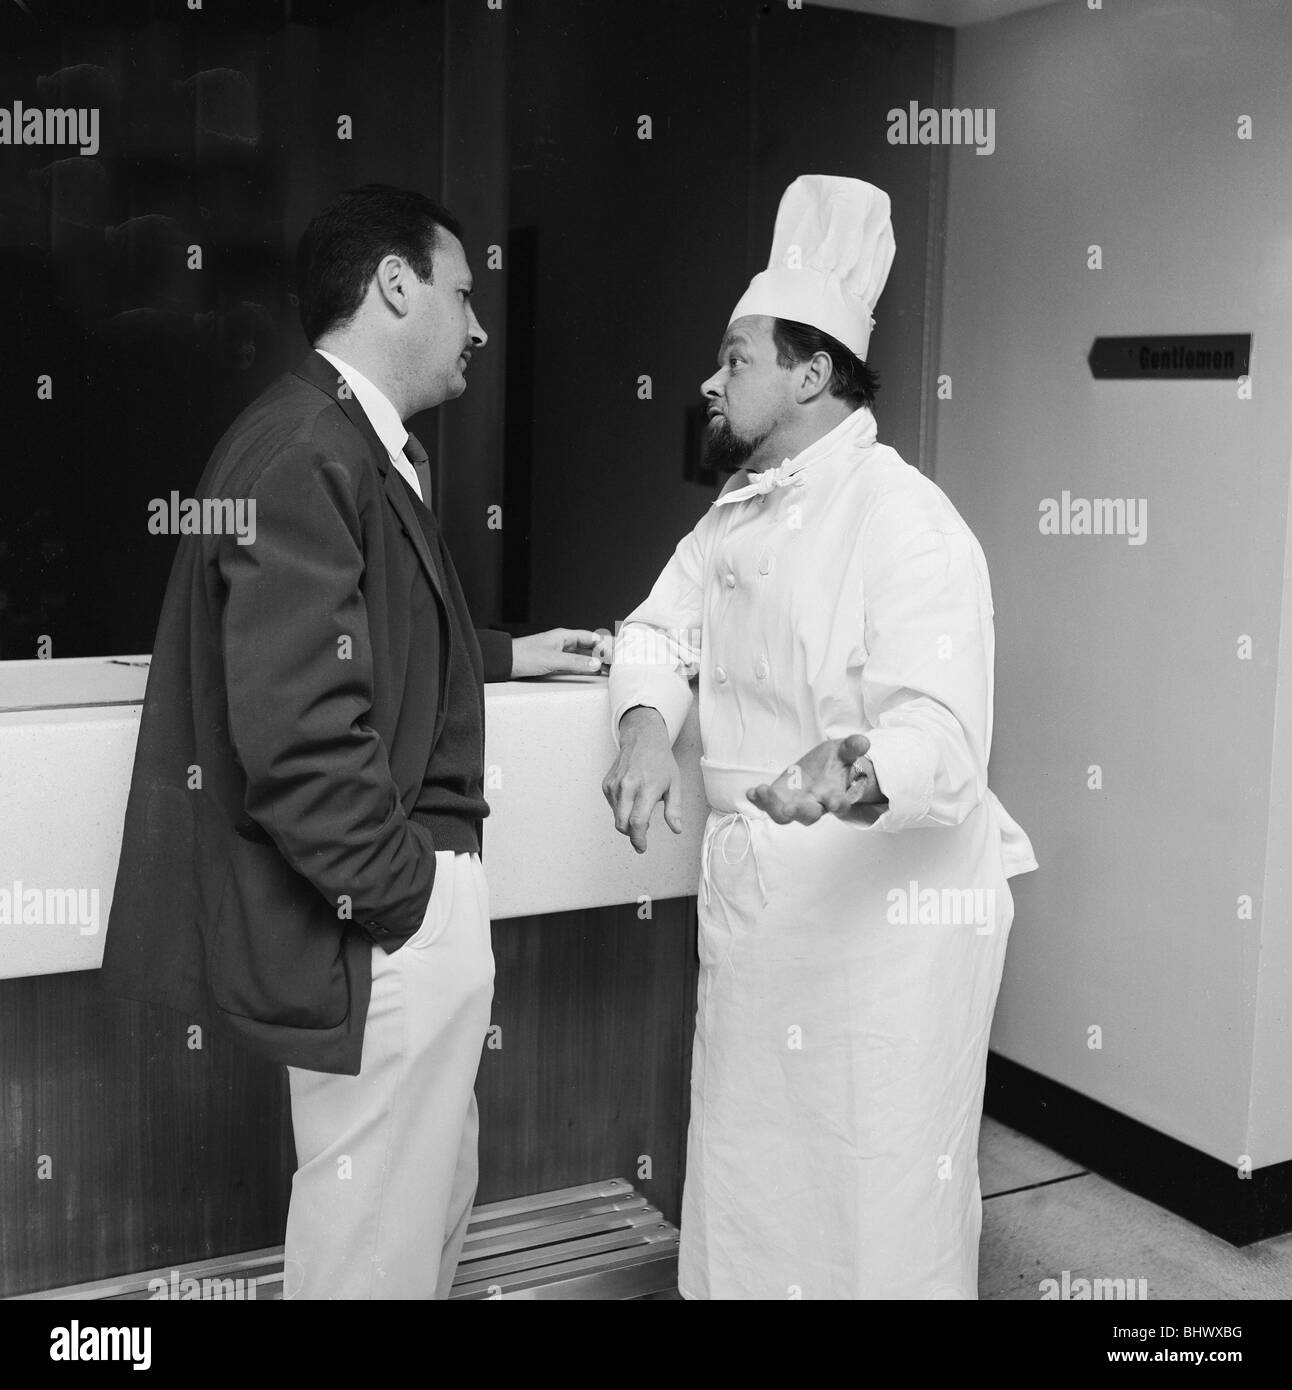 1966 World Cup Tournament in England. The Uruguay world Cup team arrive in Sheffield for their upcoming quarter final match. The team doctor Robert Masciah talks over the menu with chef of the Hallam Tower hotel Heinz Meiner 24th July 1966. Stock Photo